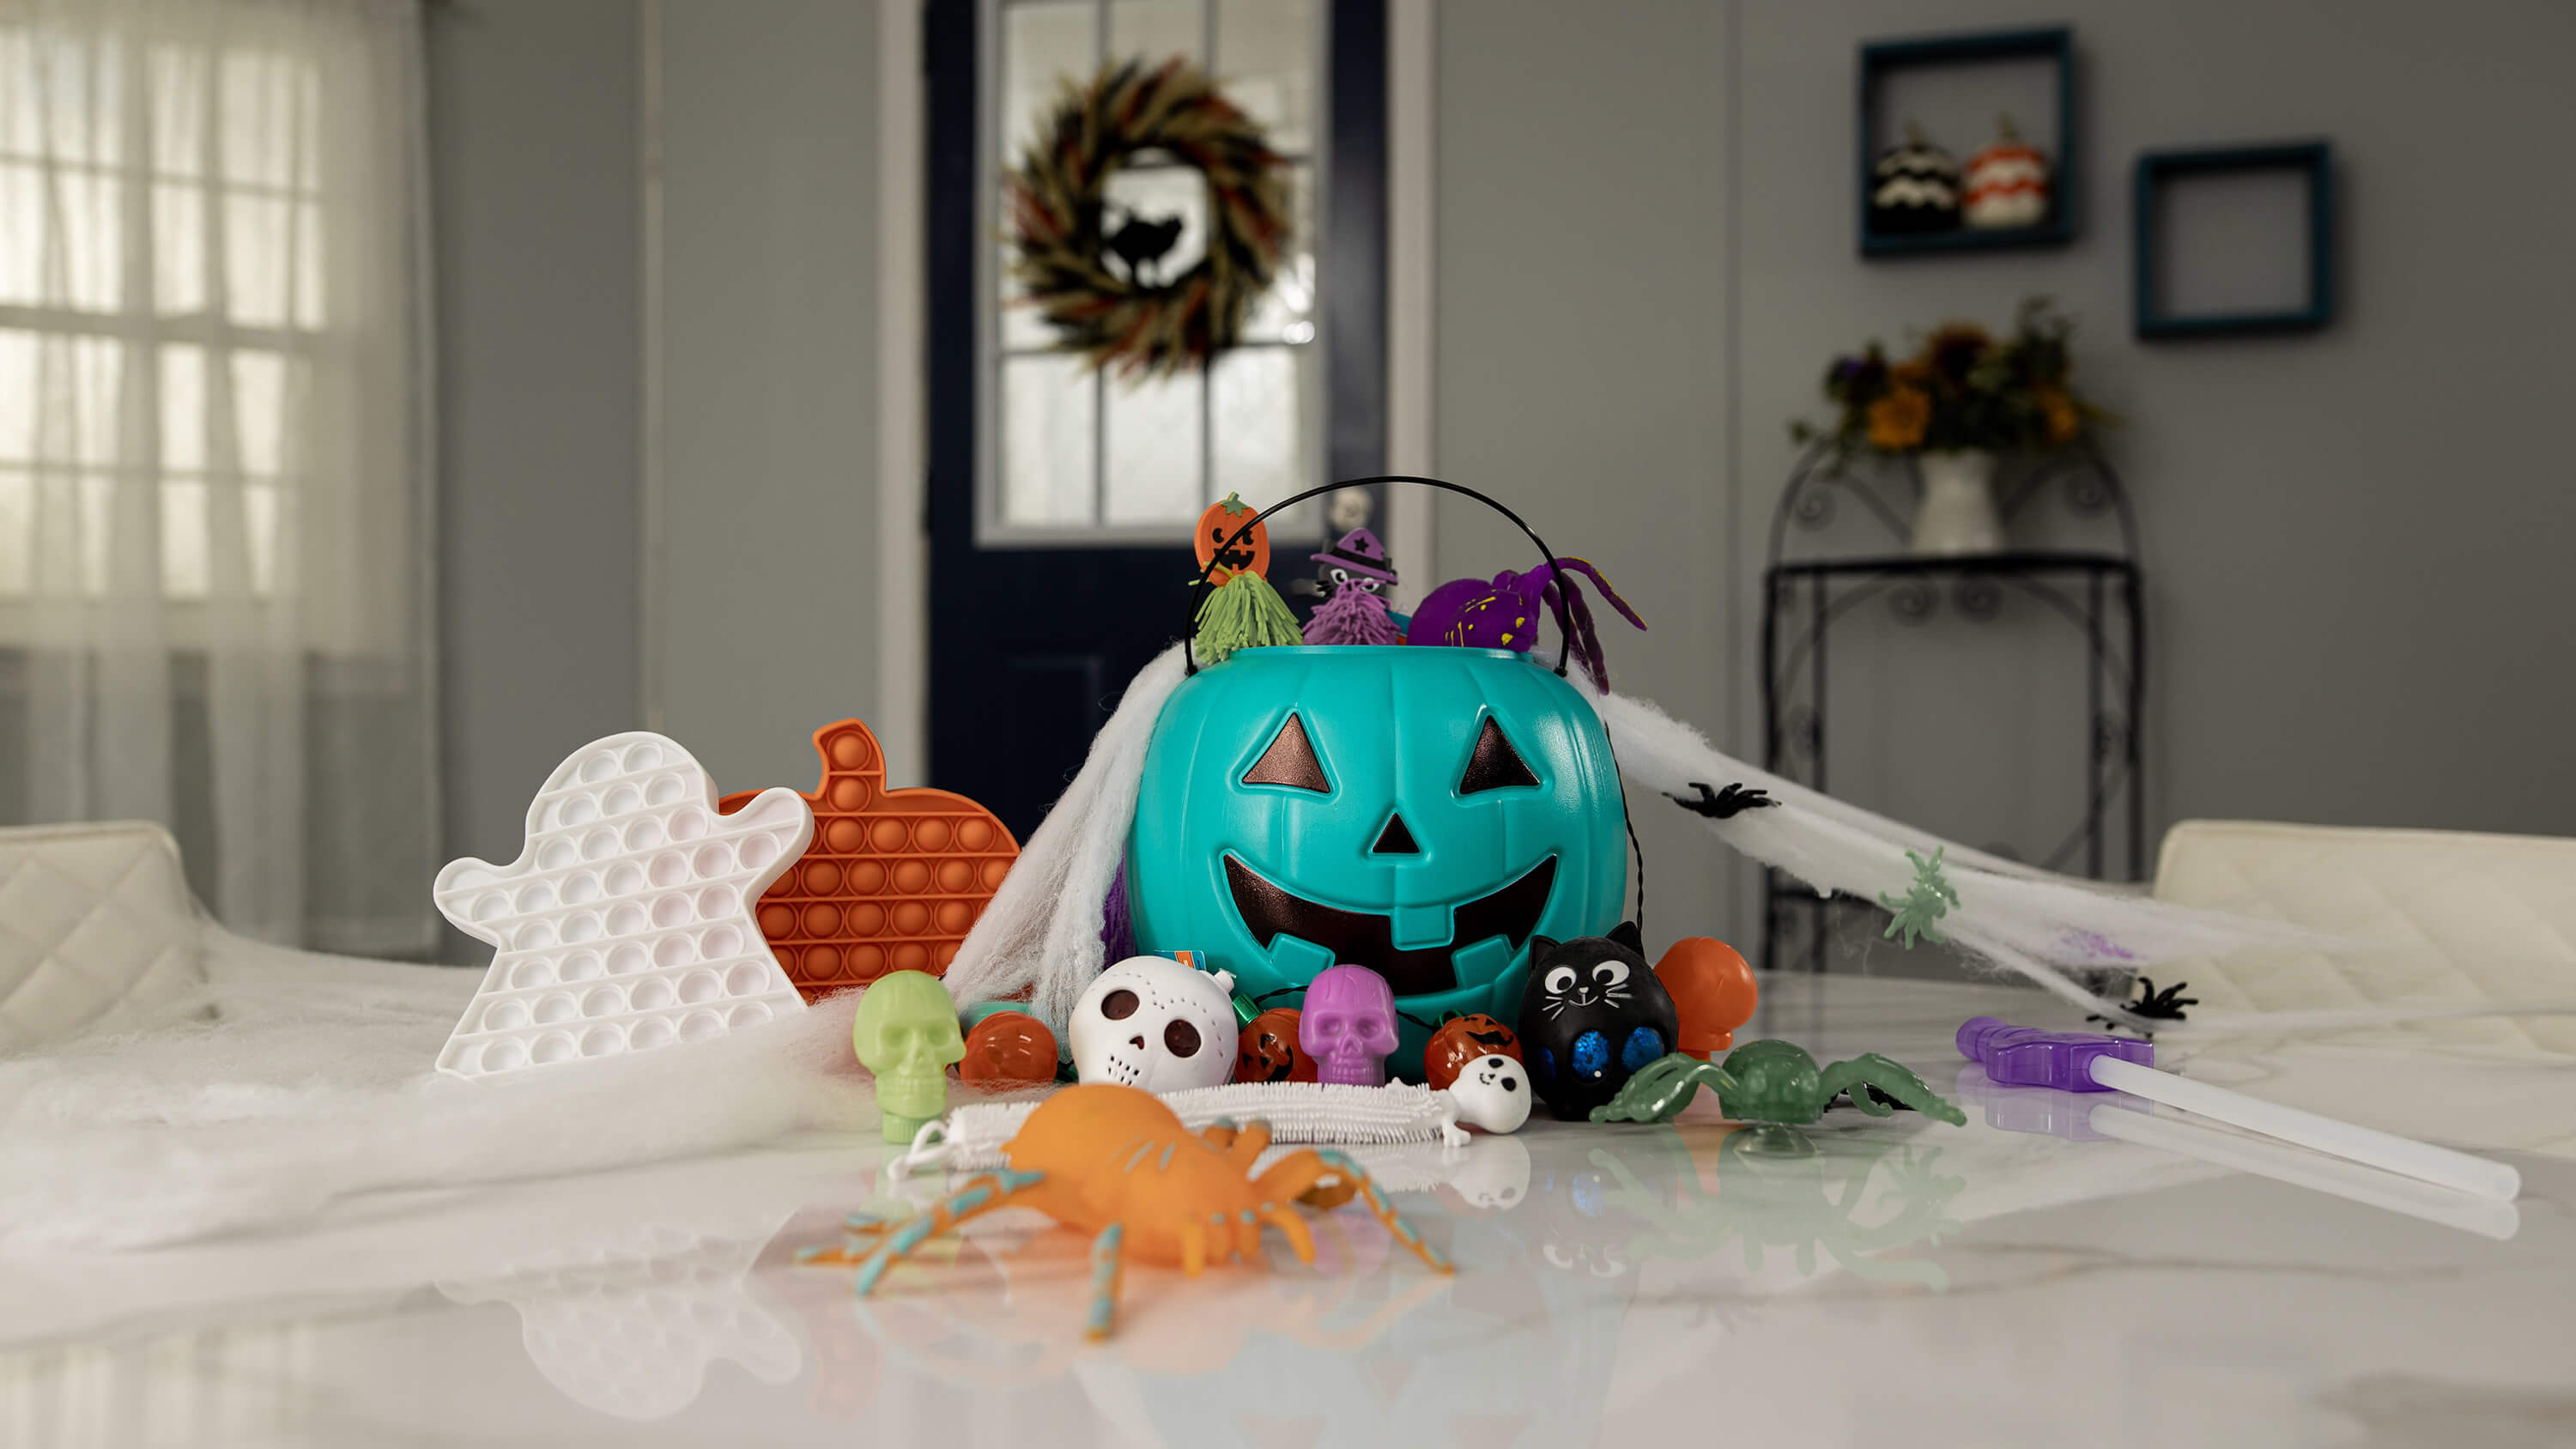 A teal pumpkin and other Halloween decorations on a kitchen table